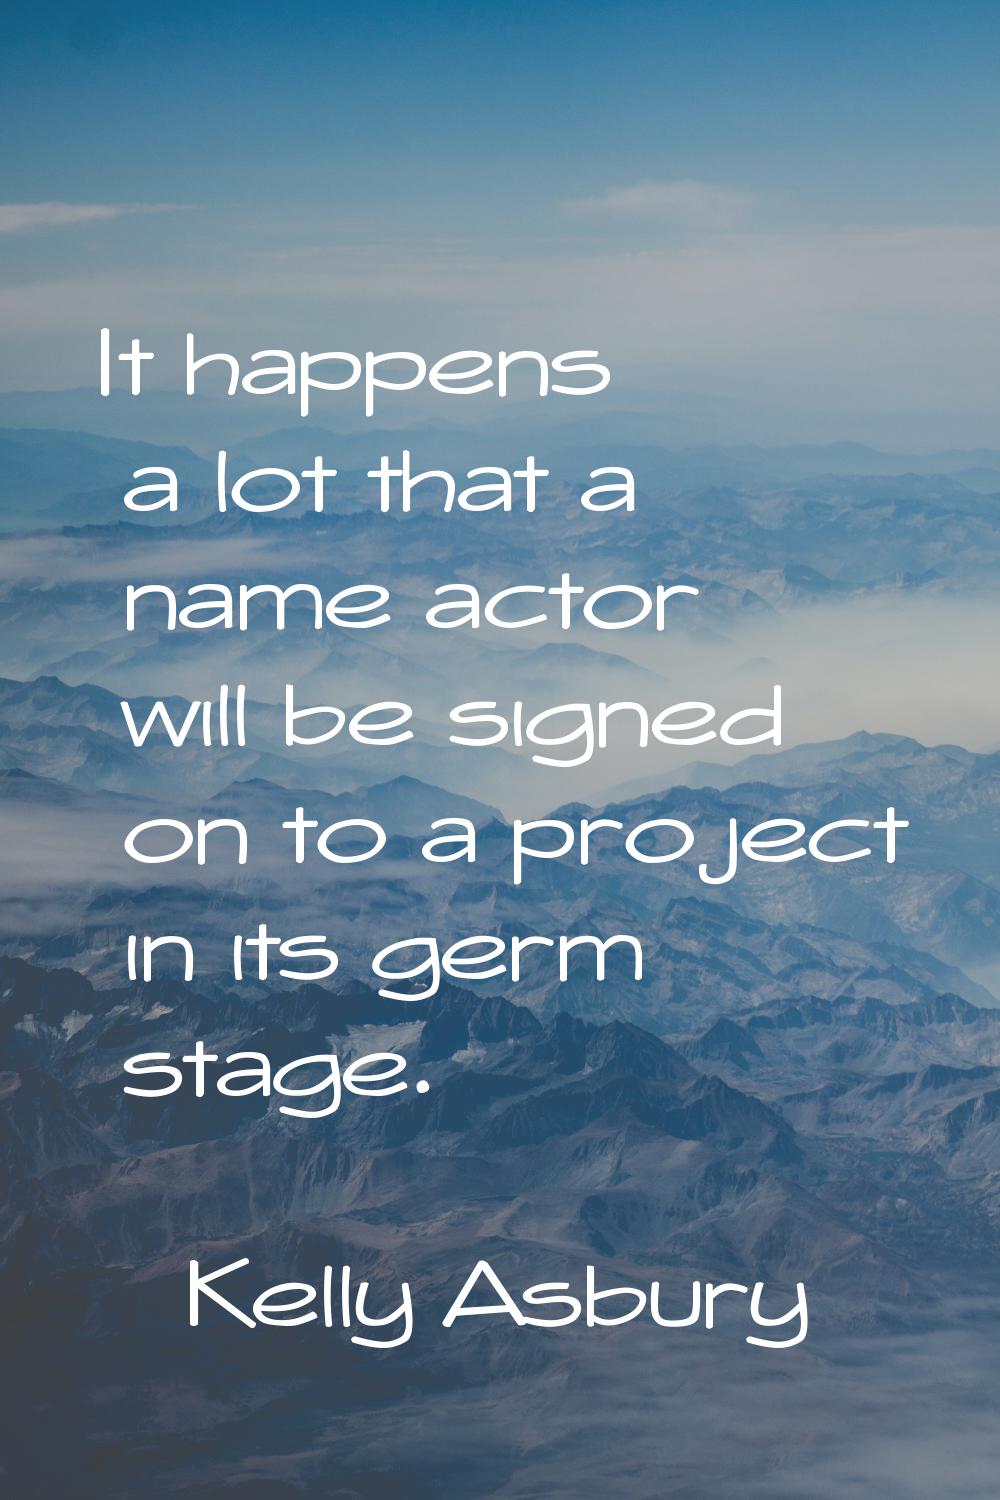 It happens a lot that a name actor will be signed on to a project in its germ stage.